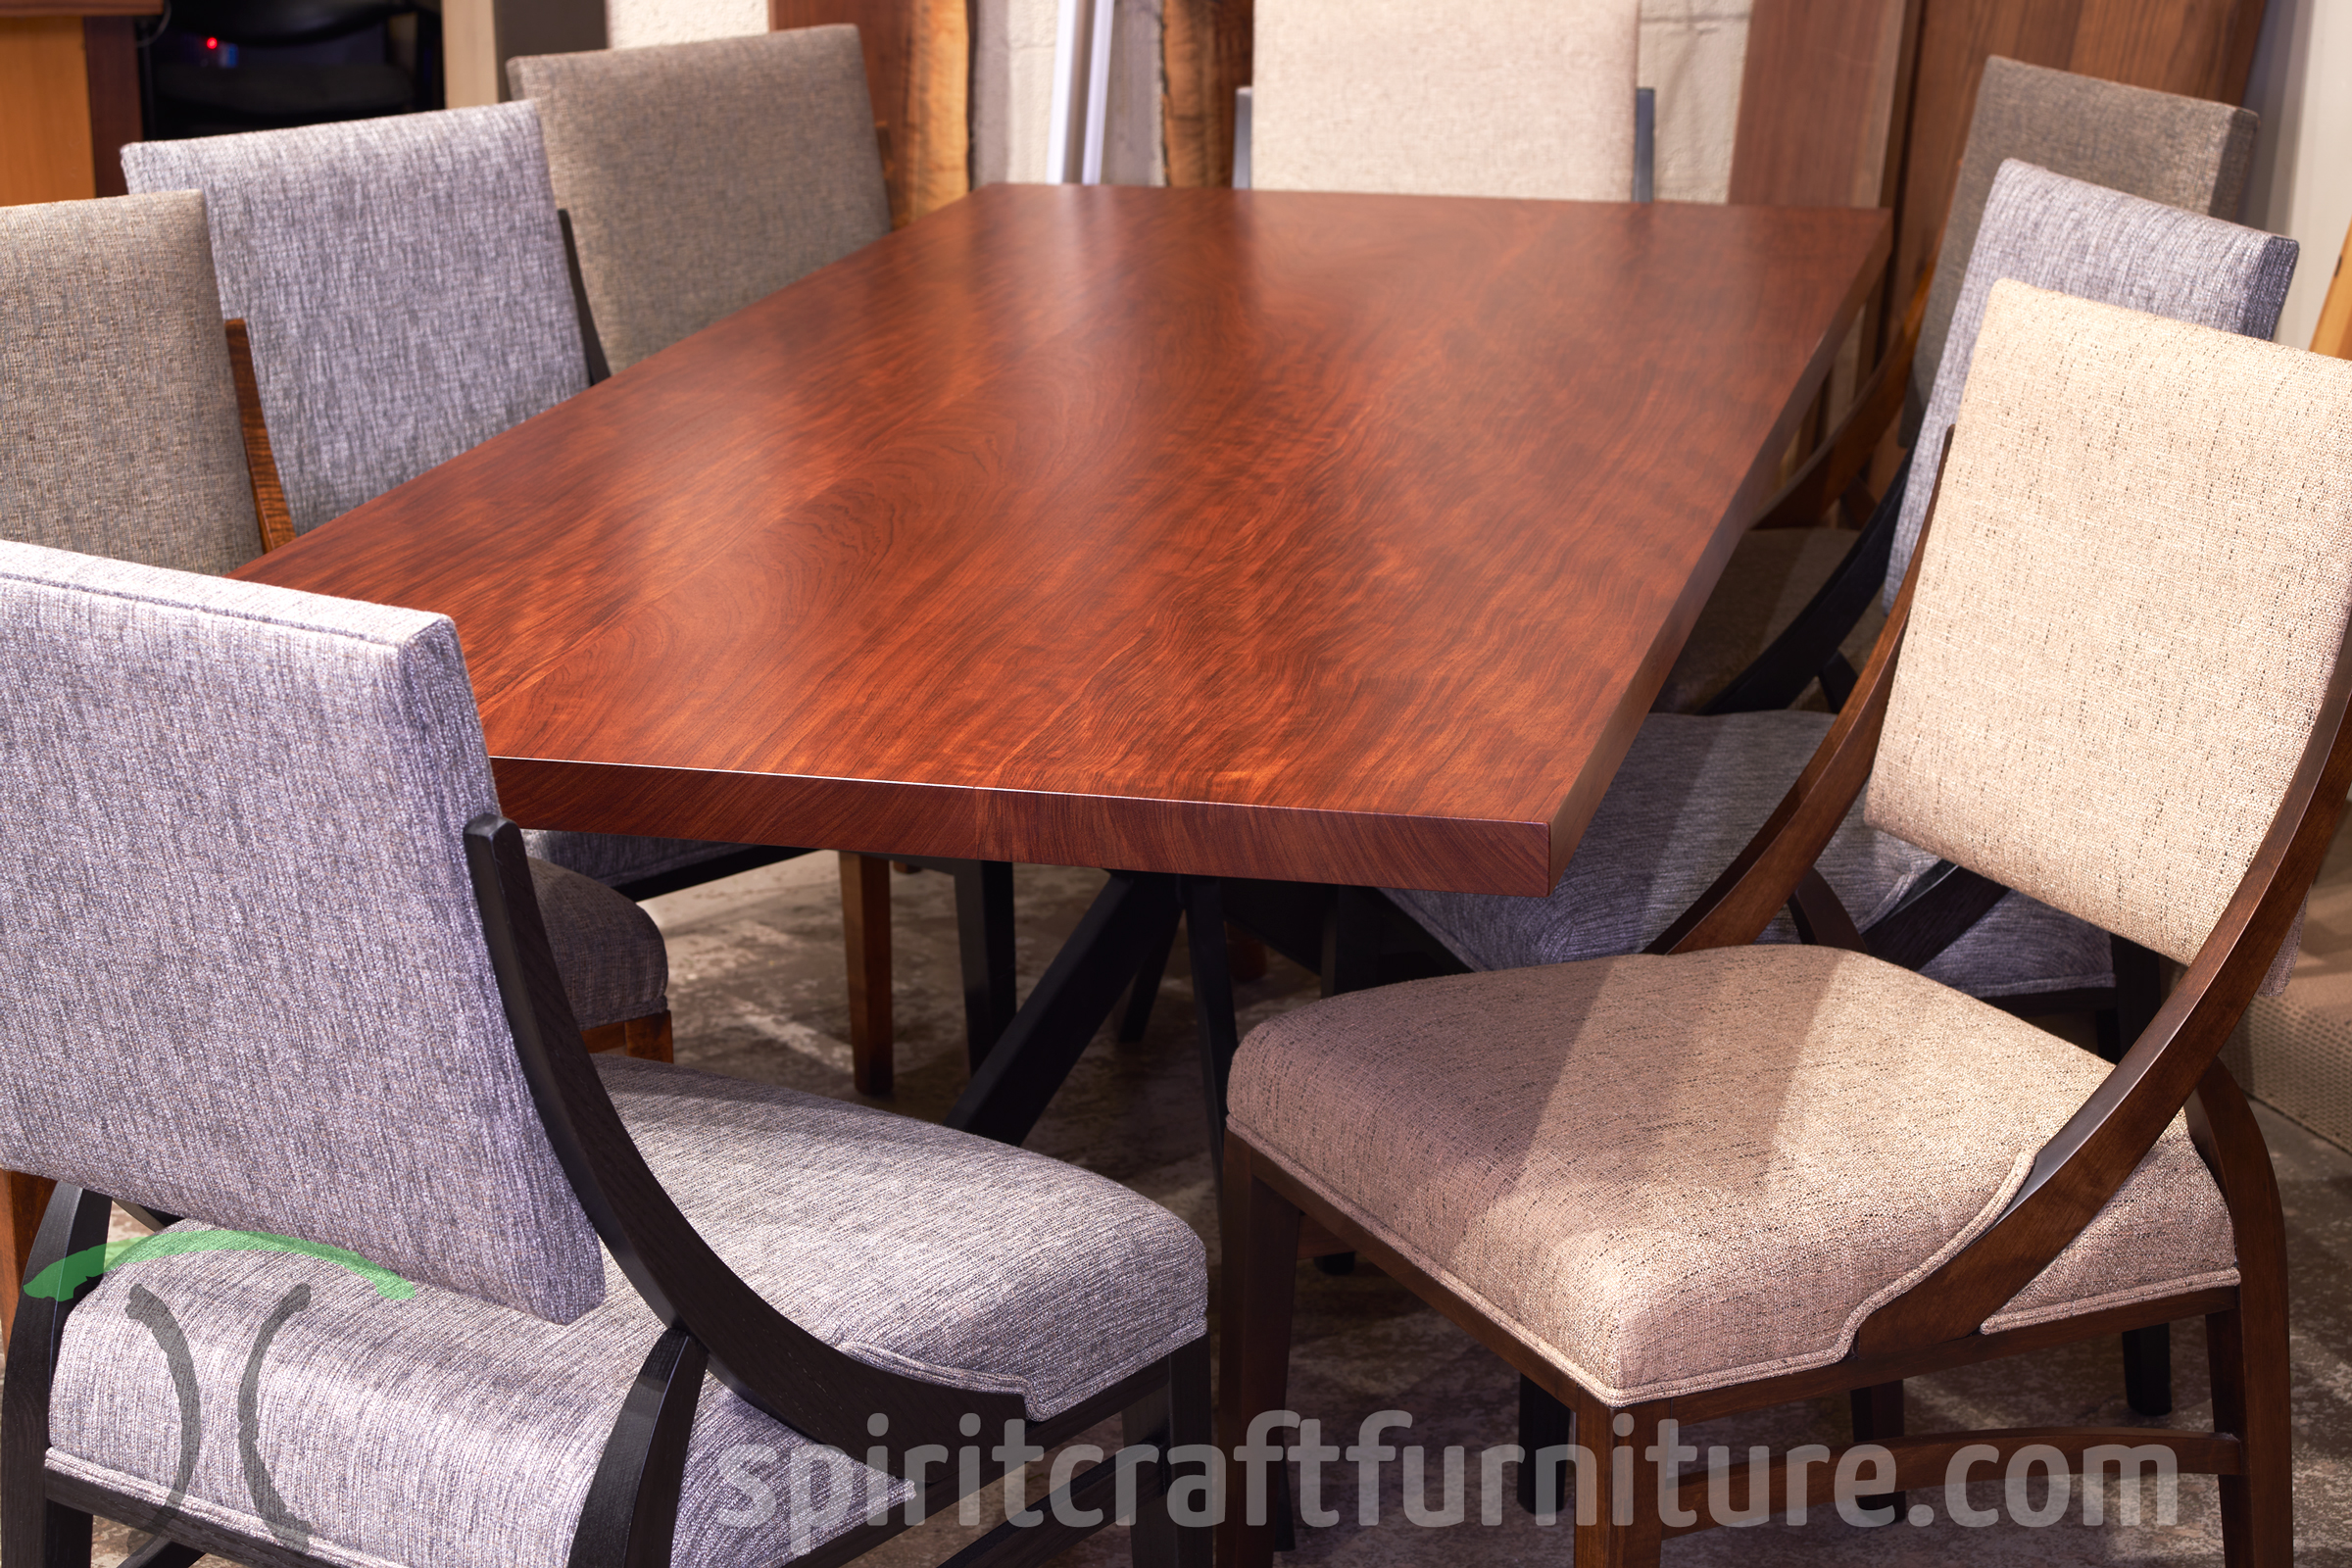 https://spiritcraftfurniture.com/images/plank-tables/1639-bubinga-wide-plank-dining-table-with-spider-base-and-rh-yoder-korbyn-chairs.jpg